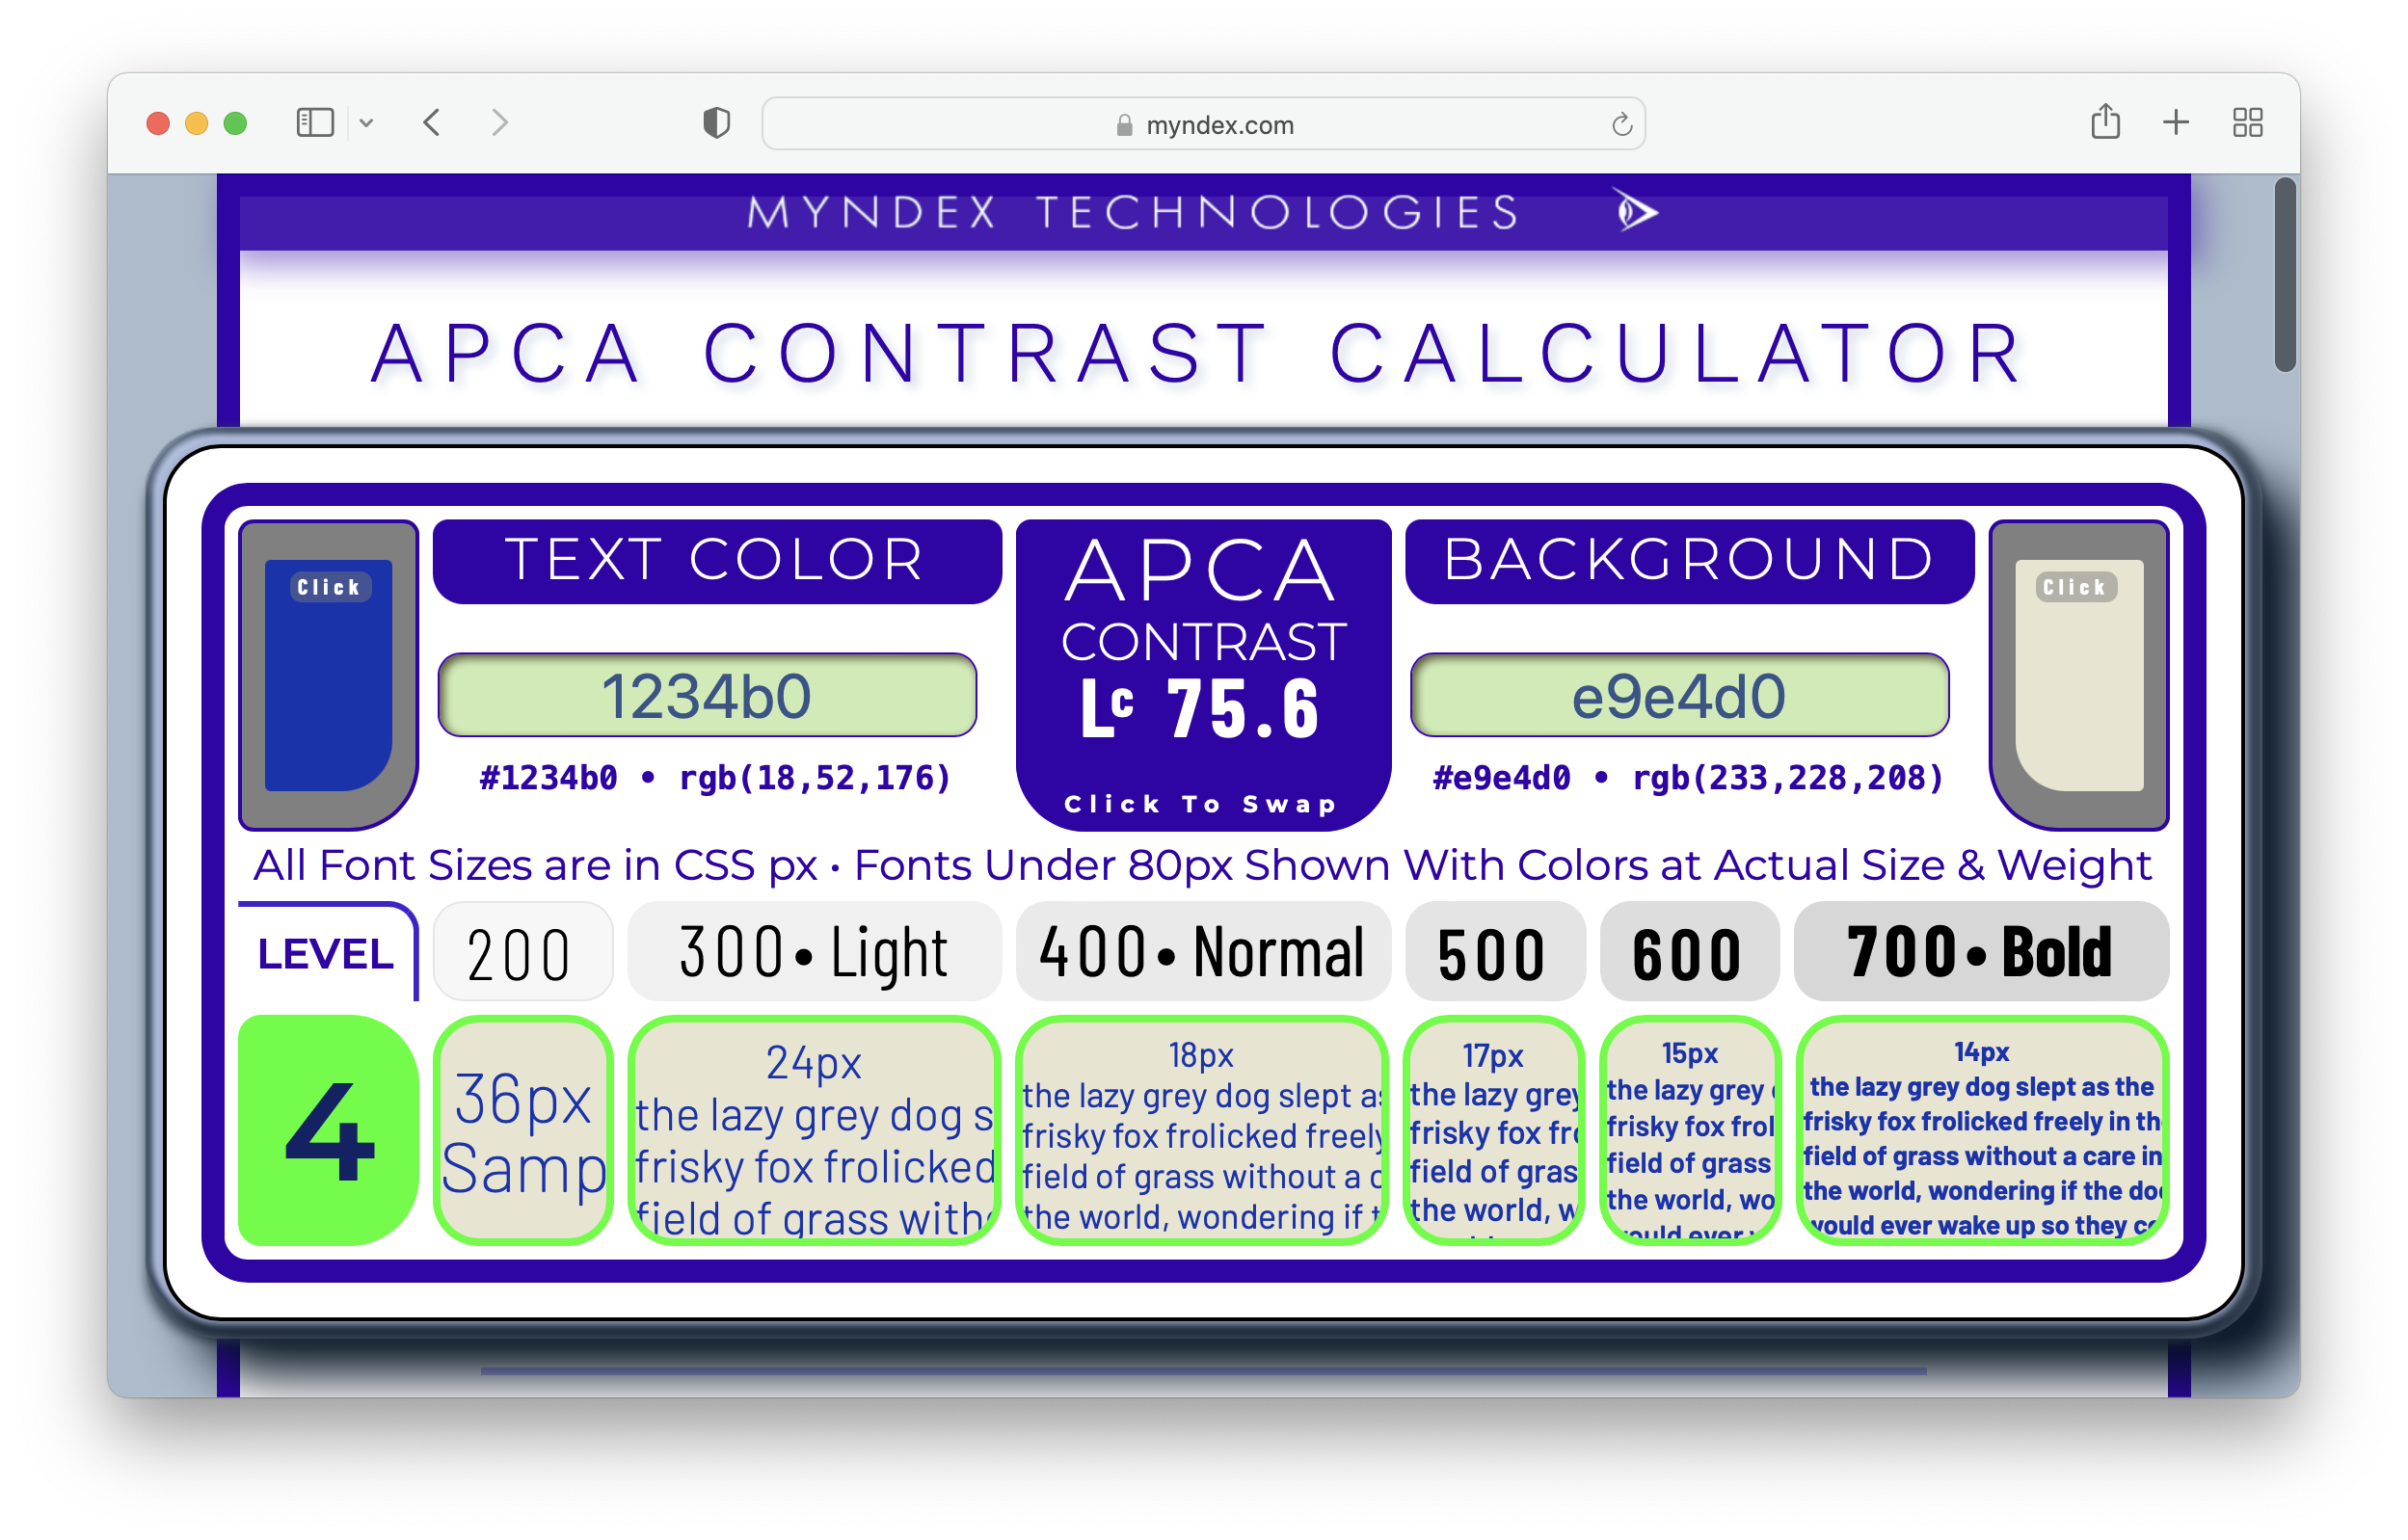 A web browser showing the APCA Contrast Calculator